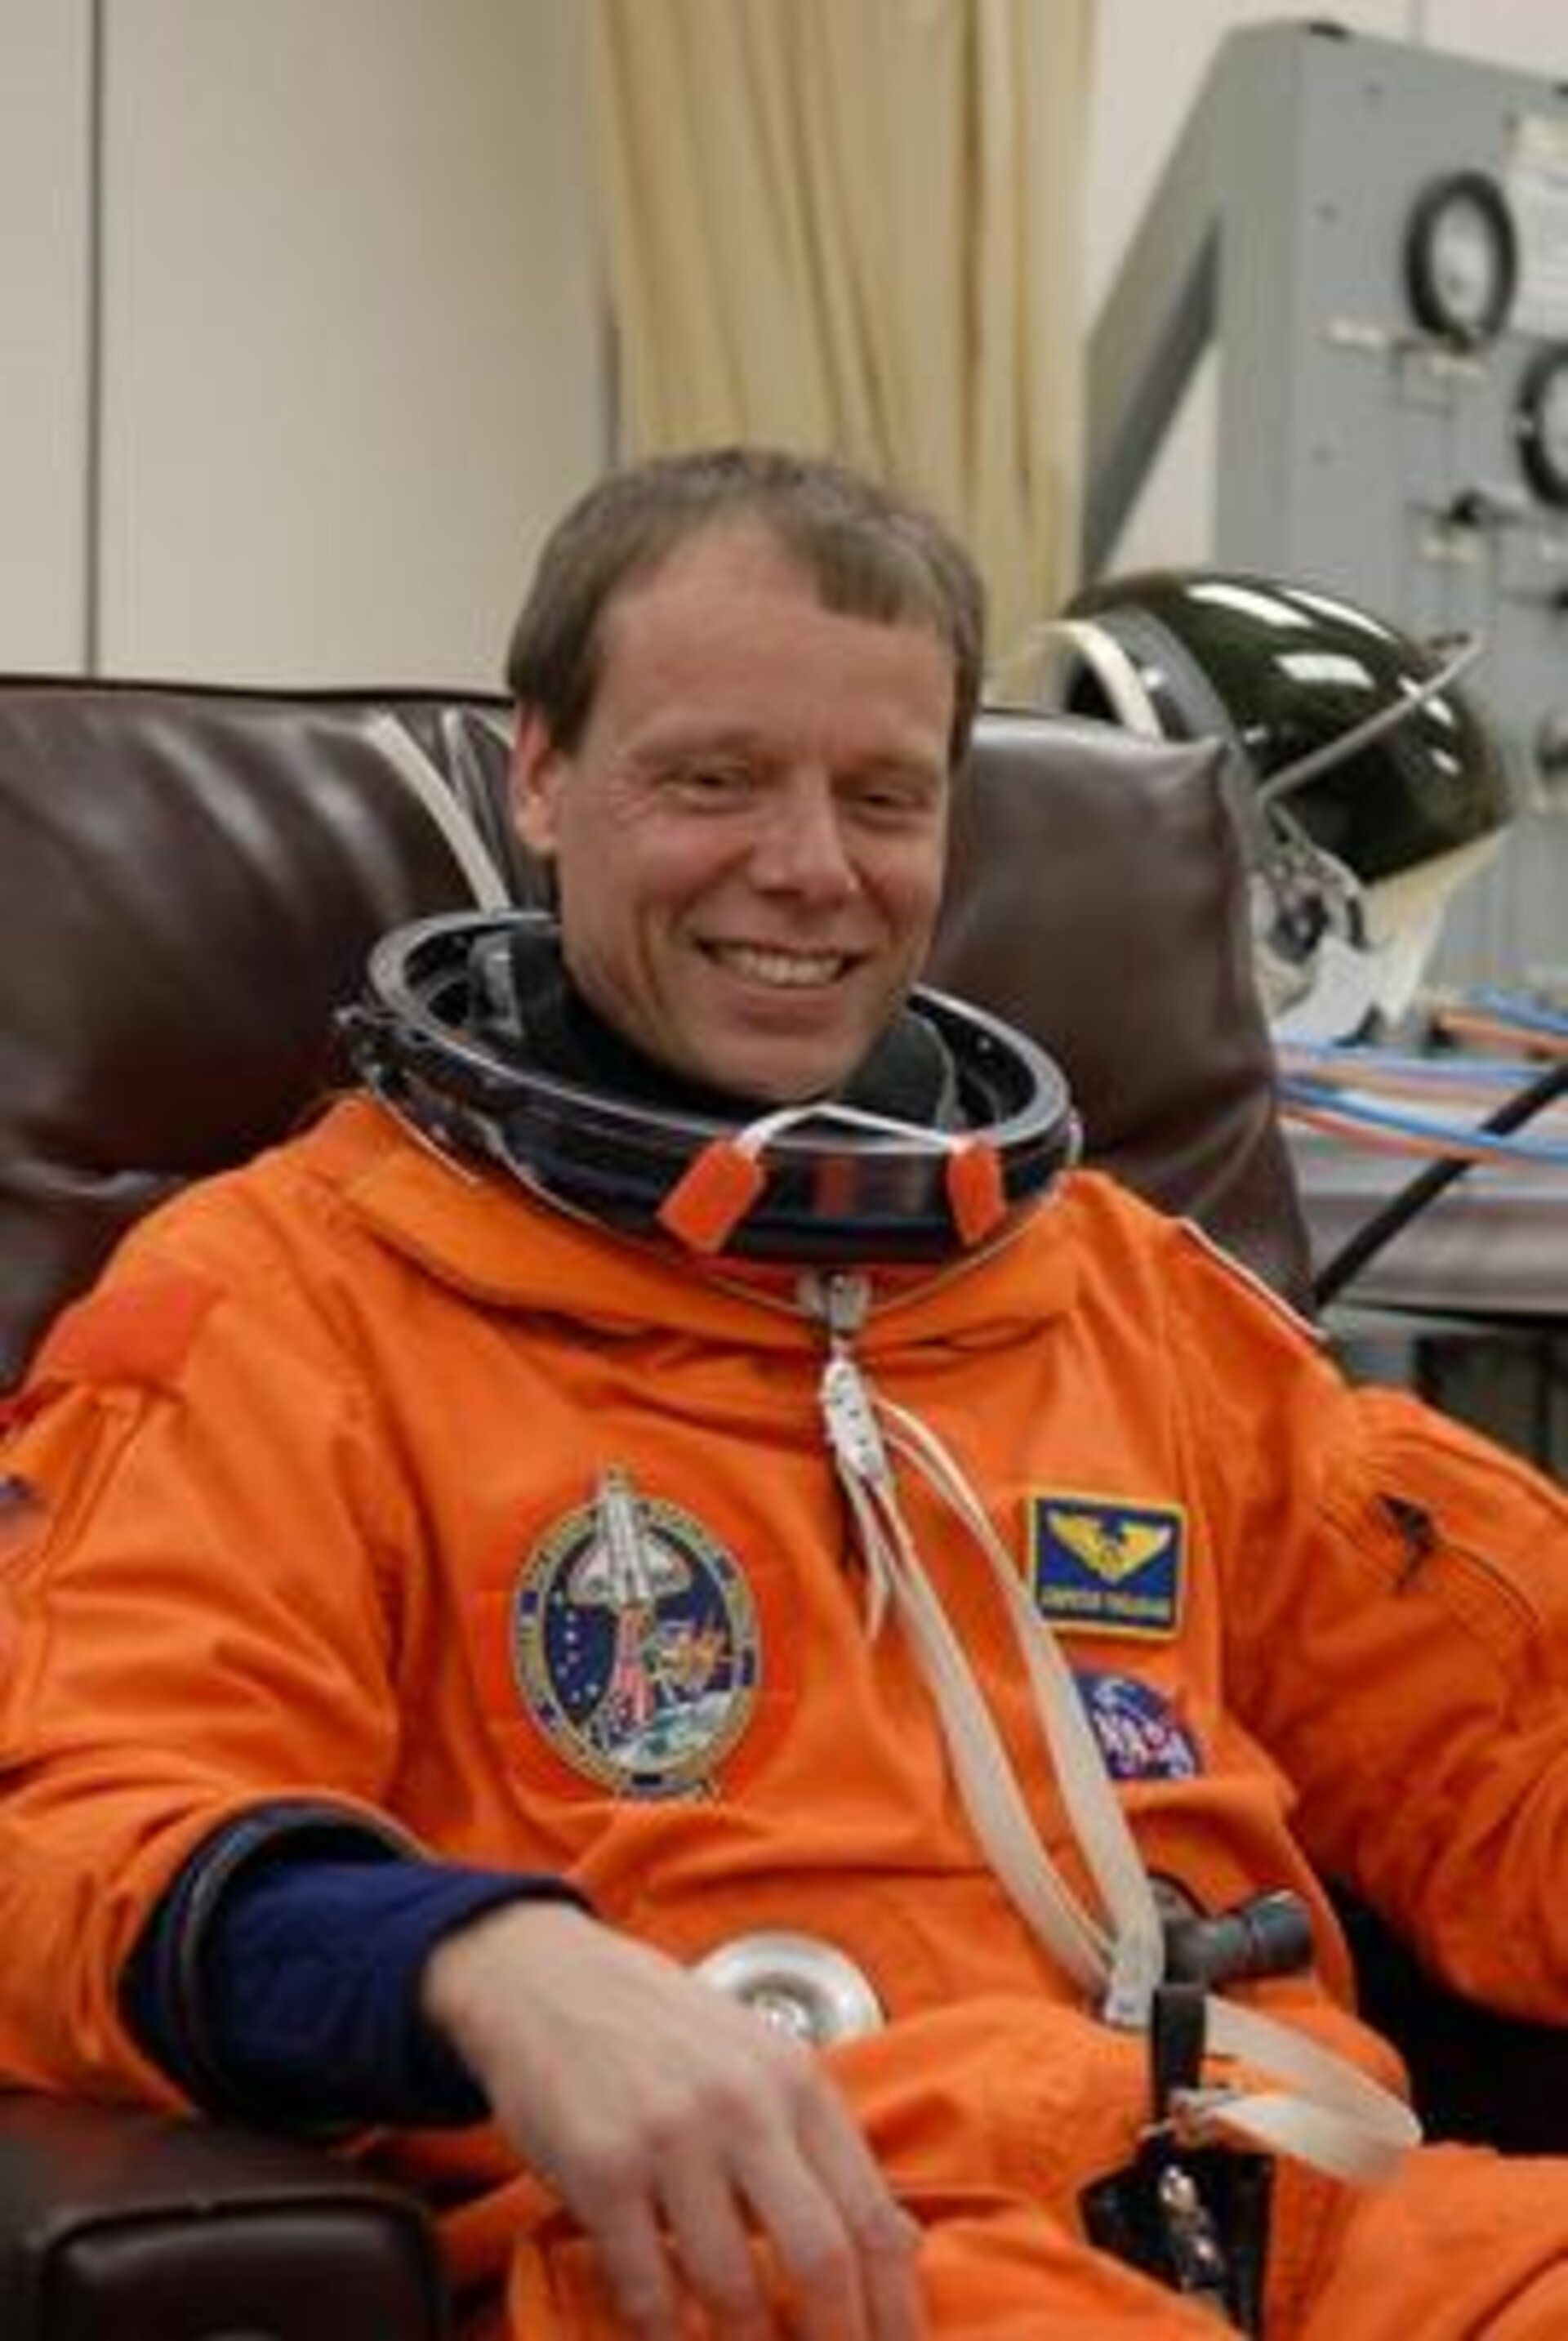 ESA - ESA astronaut Christer Fuglesang during suiting up before the launch